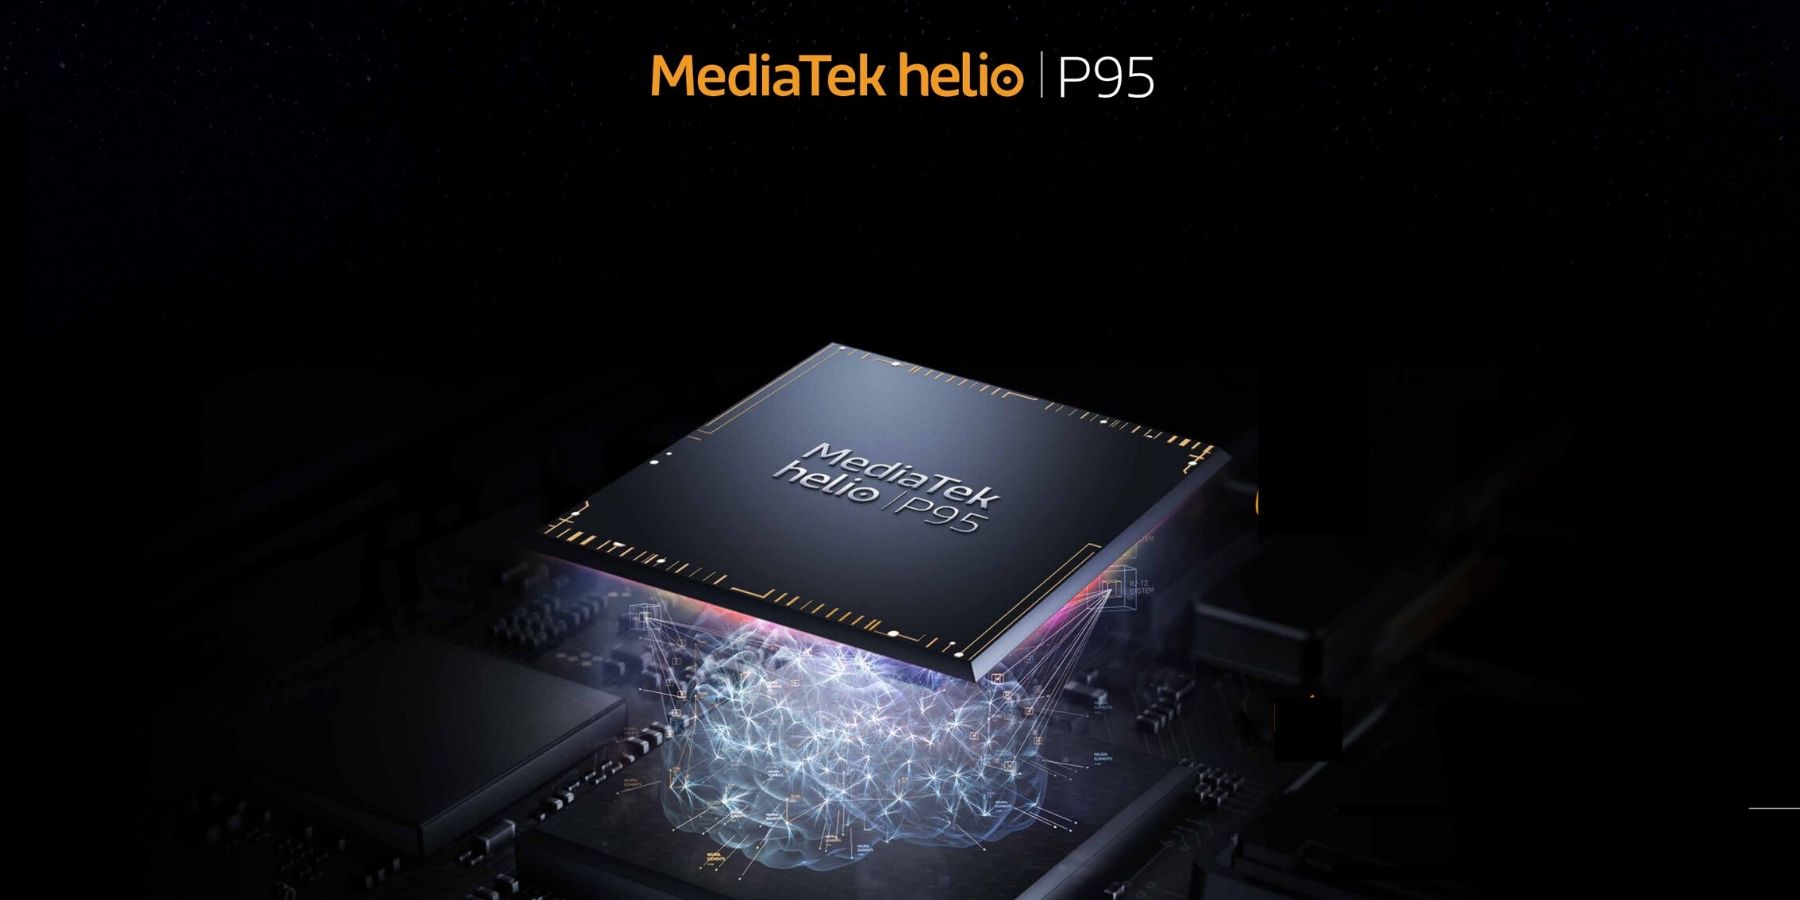 Mediatek Helio P95 vs Helio P90 vs Helio G80 & G70 Comparison – Literally the same specification as the P90 but apparently it does more AI